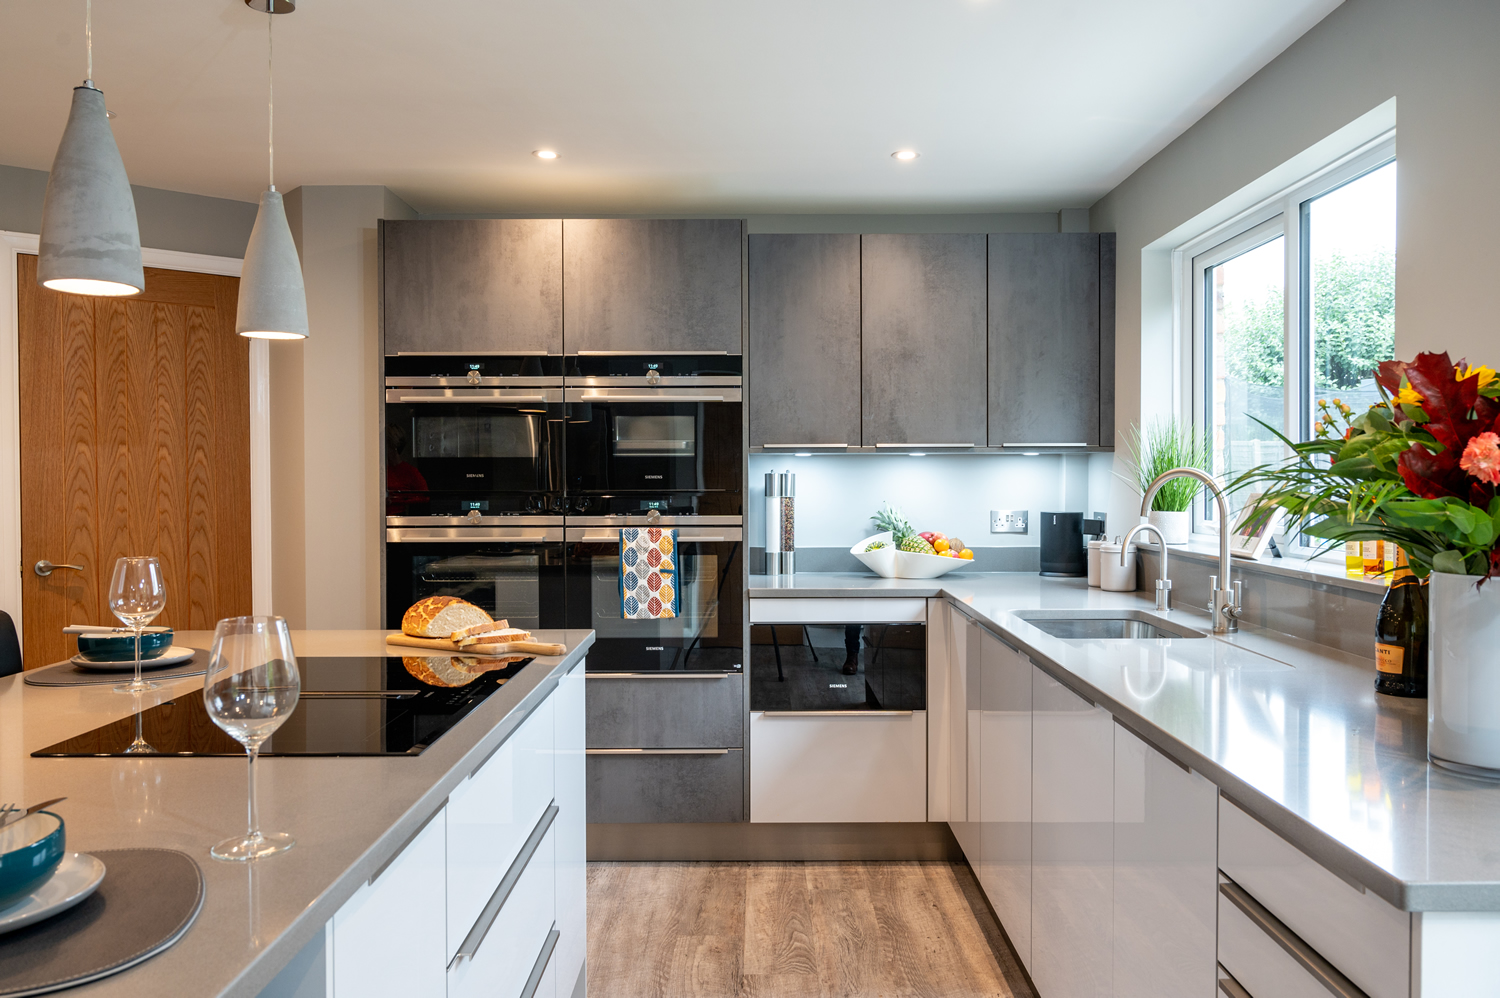 Wanting a New Kitchen – So What’s Stopping You?